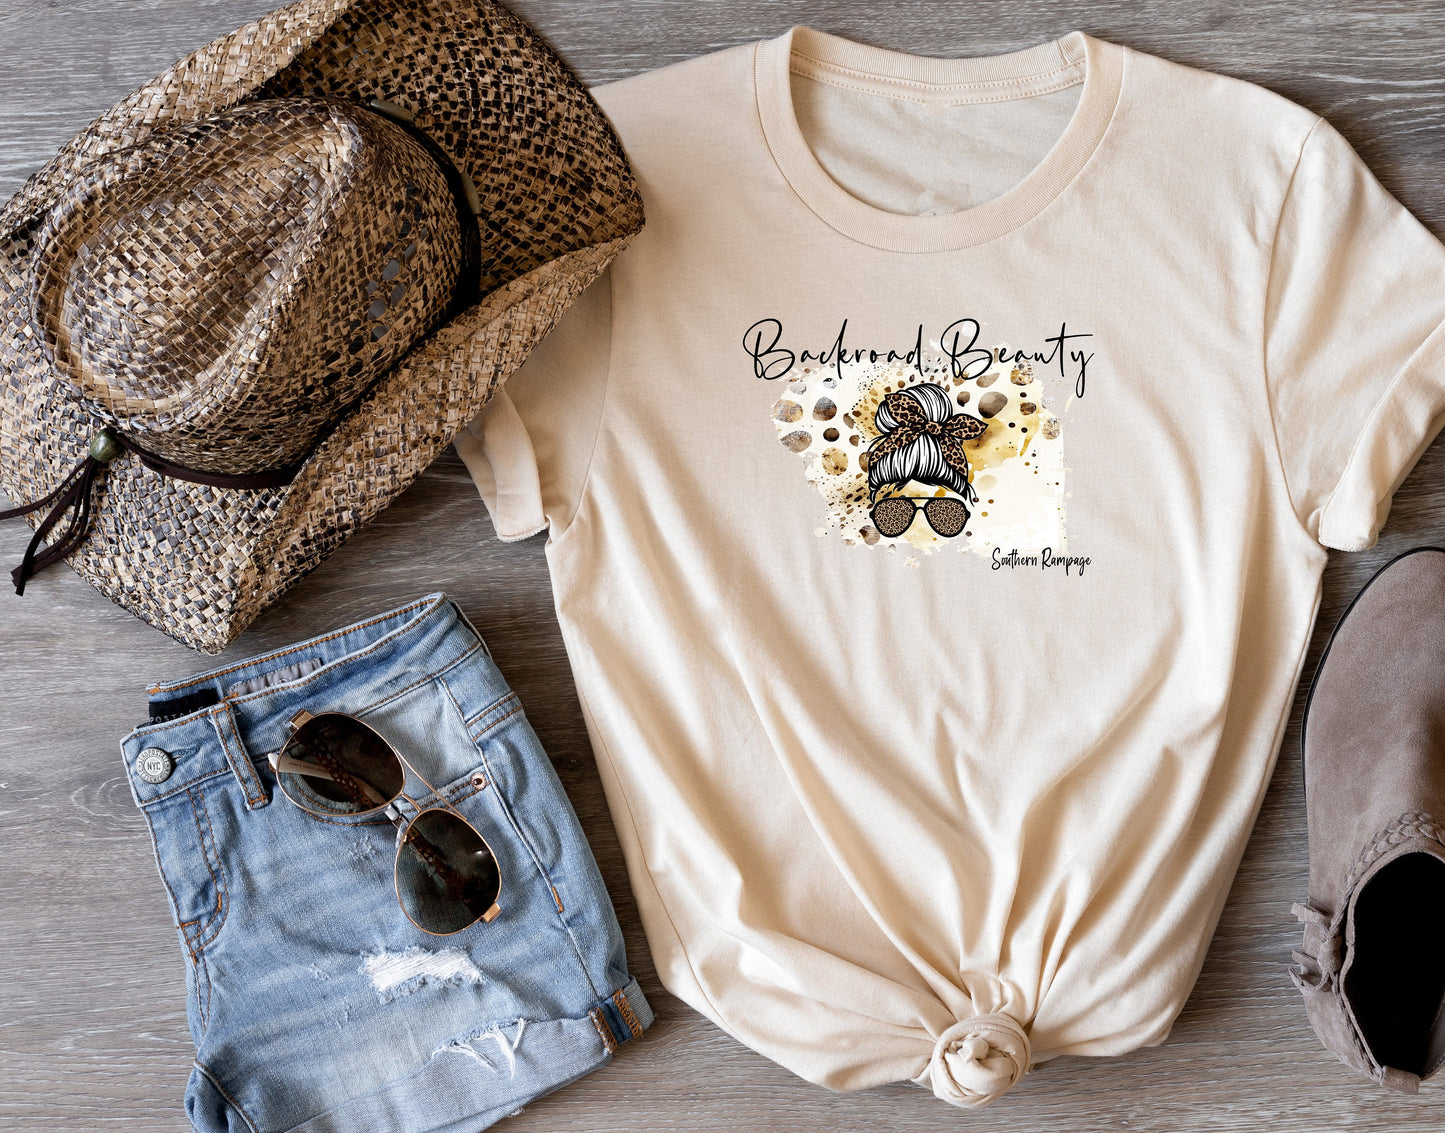 New Release Backroads Beauty T Shirt, Tshirt, Graphic T's  100% Cotton Tee, Motivational, Western, Country Girl